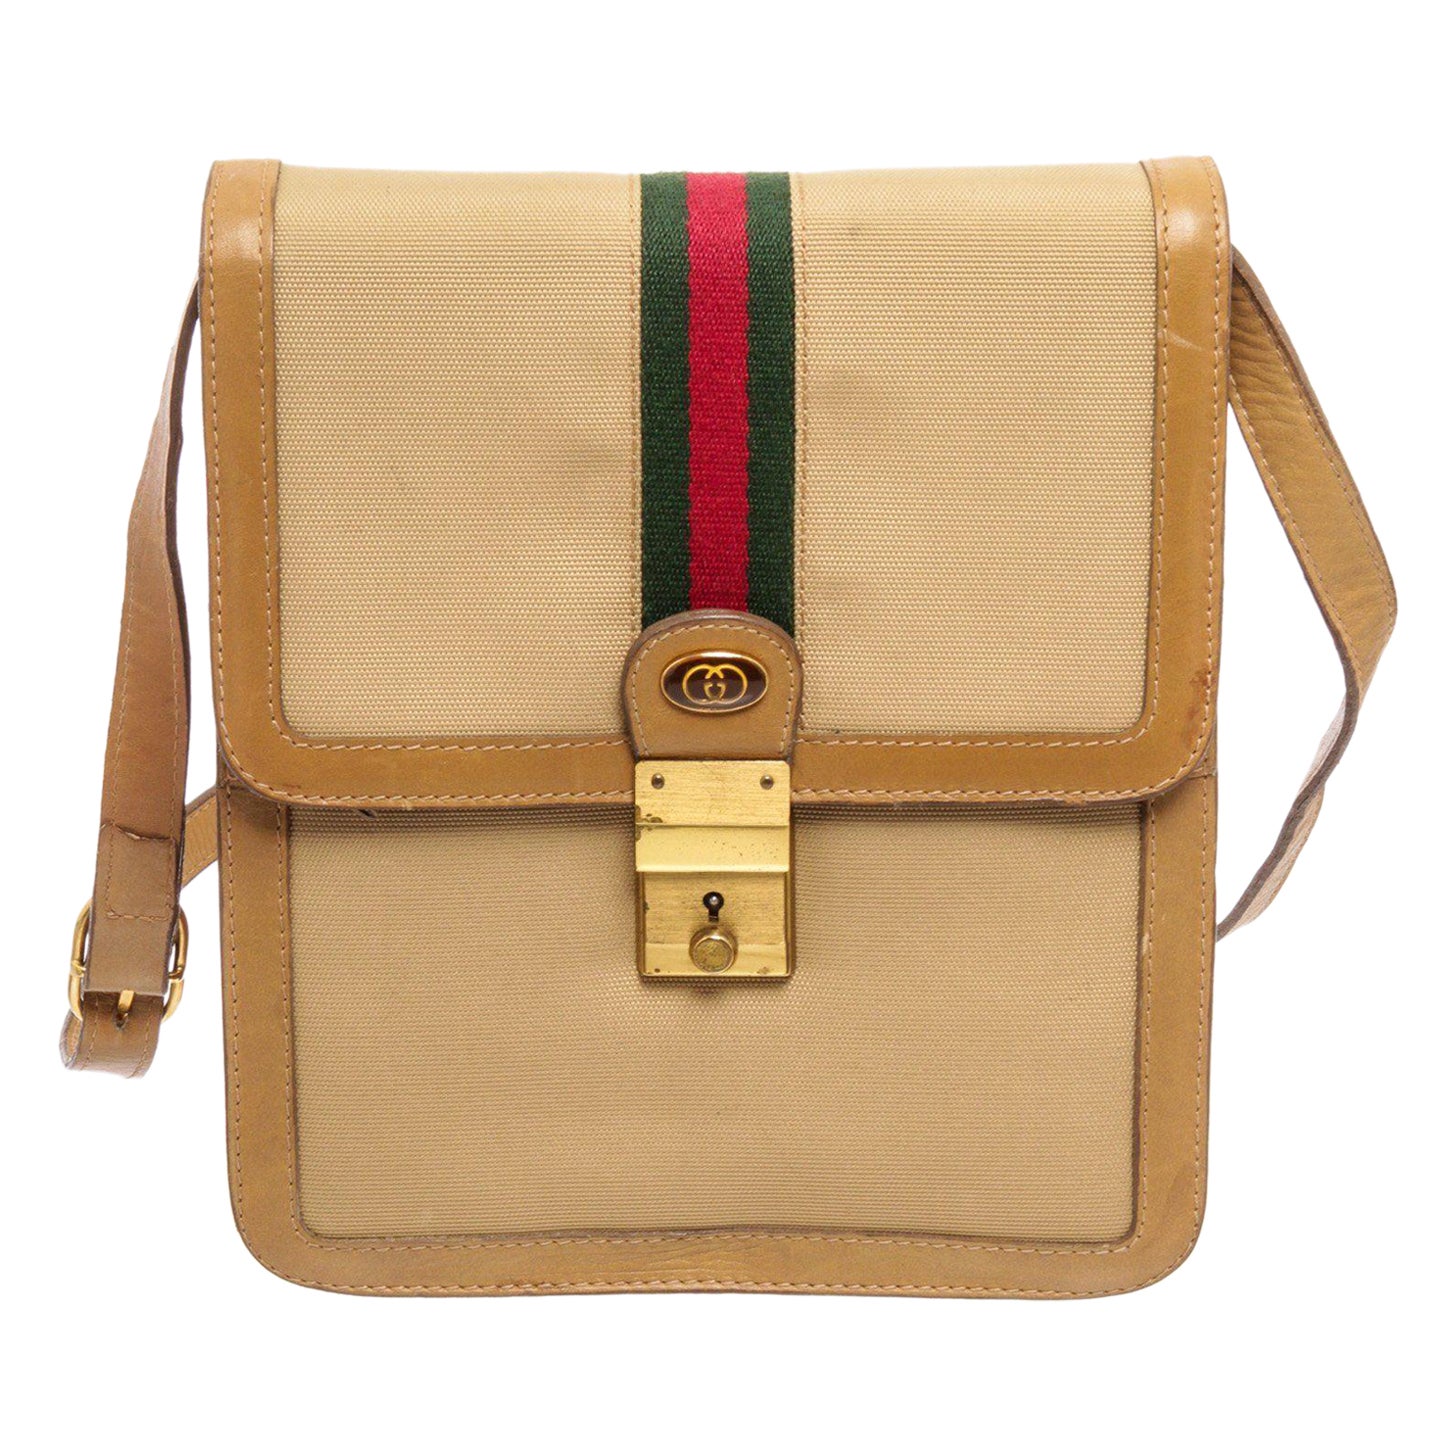 Authentic gucci sherry line crossbody shoulder GG canvas beige